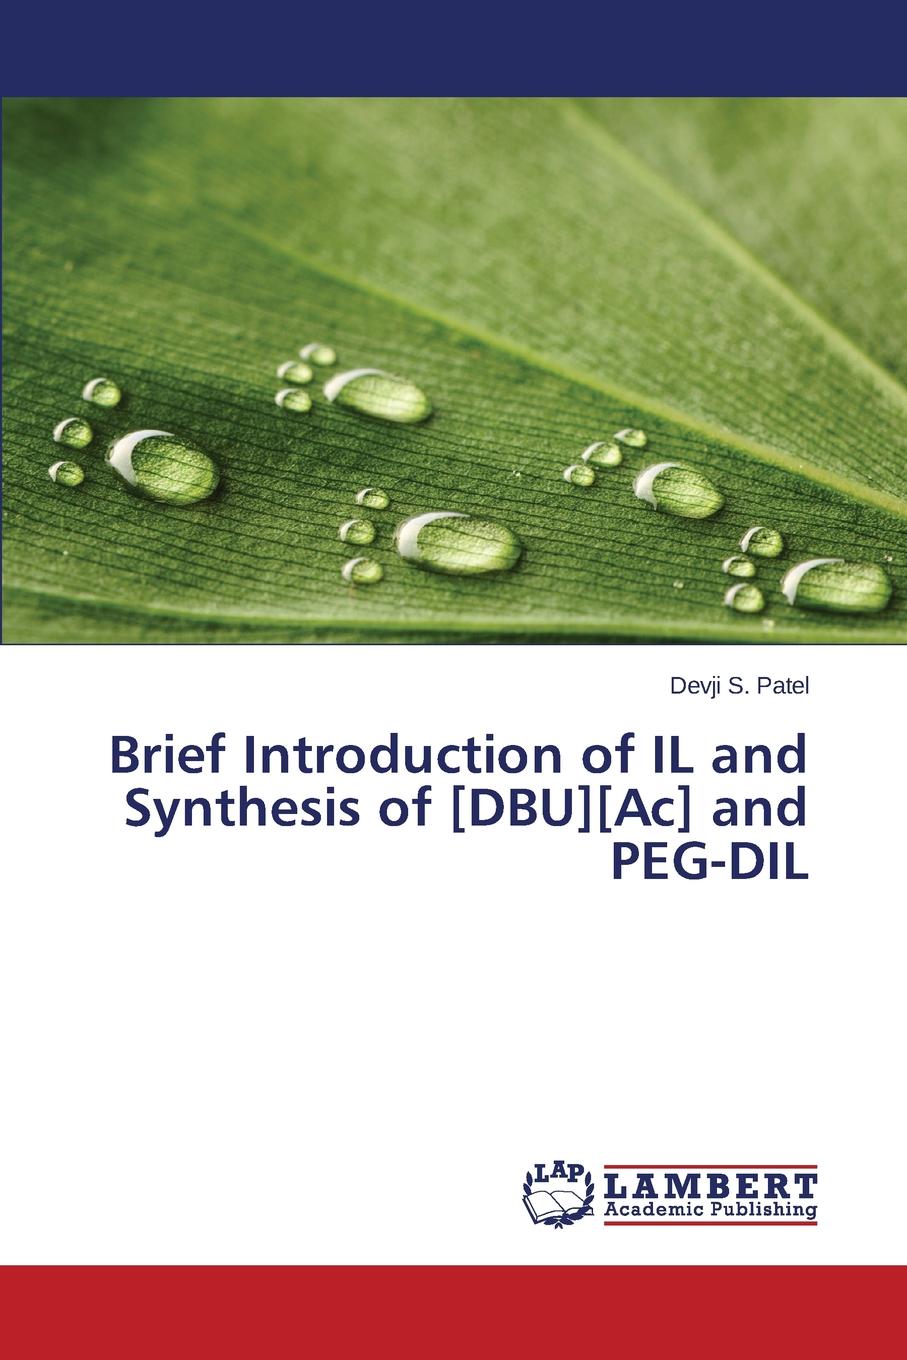 Brief Introduction of IL and Synthesis of .DBU..Ac. and PEG-DIL